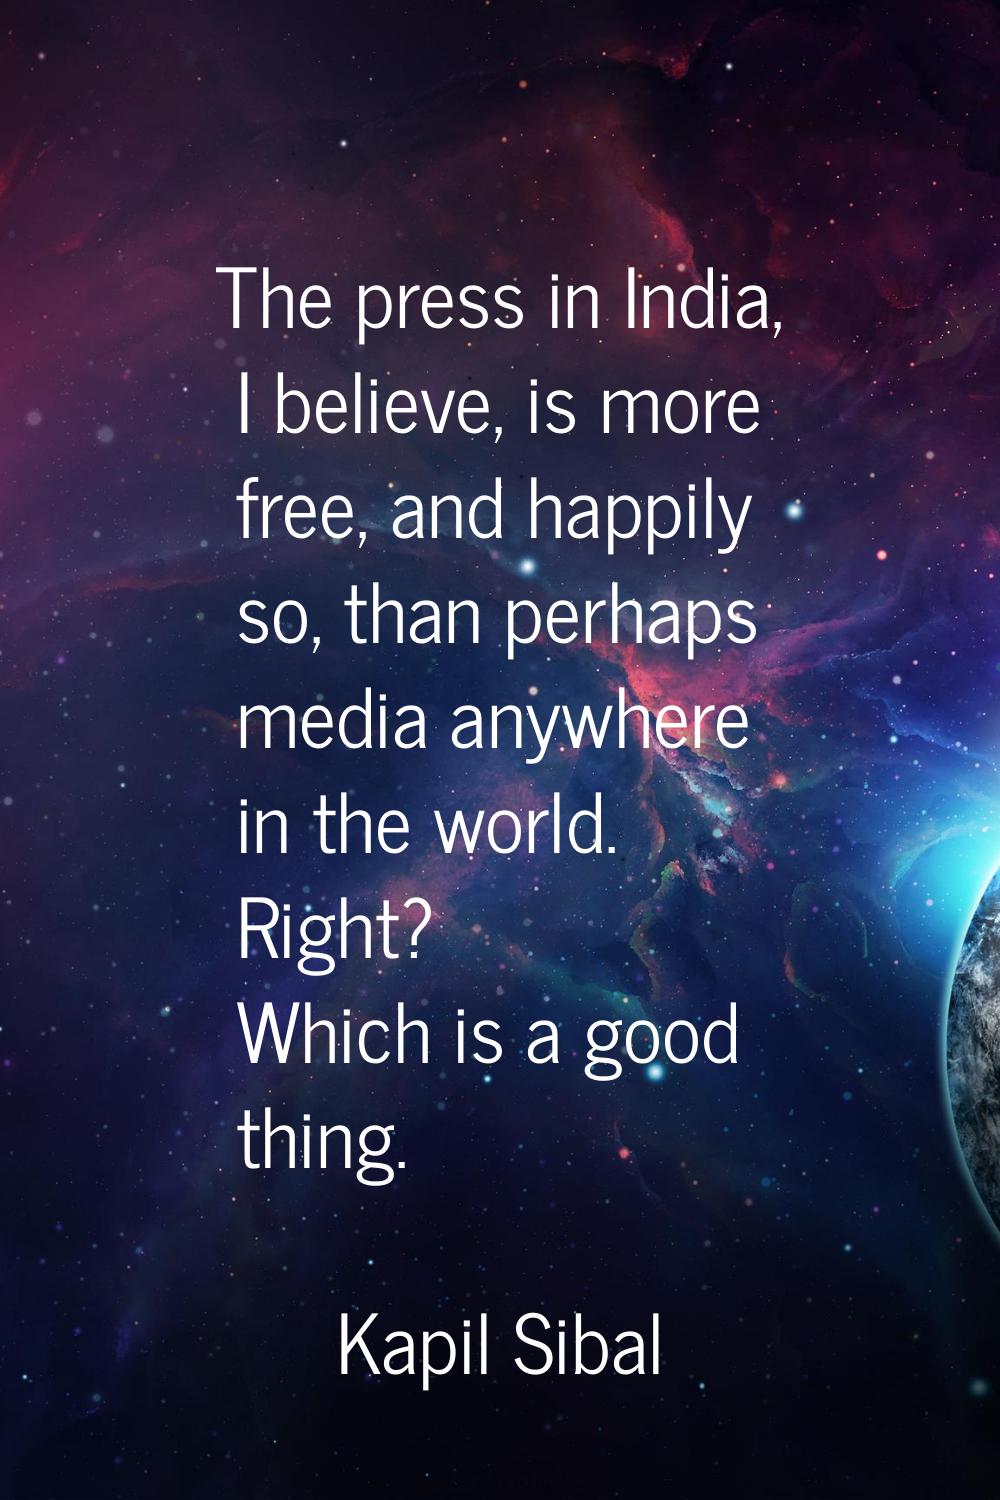 The press in India, I believe, is more free, and happily so, than perhaps media anywhere in the wor